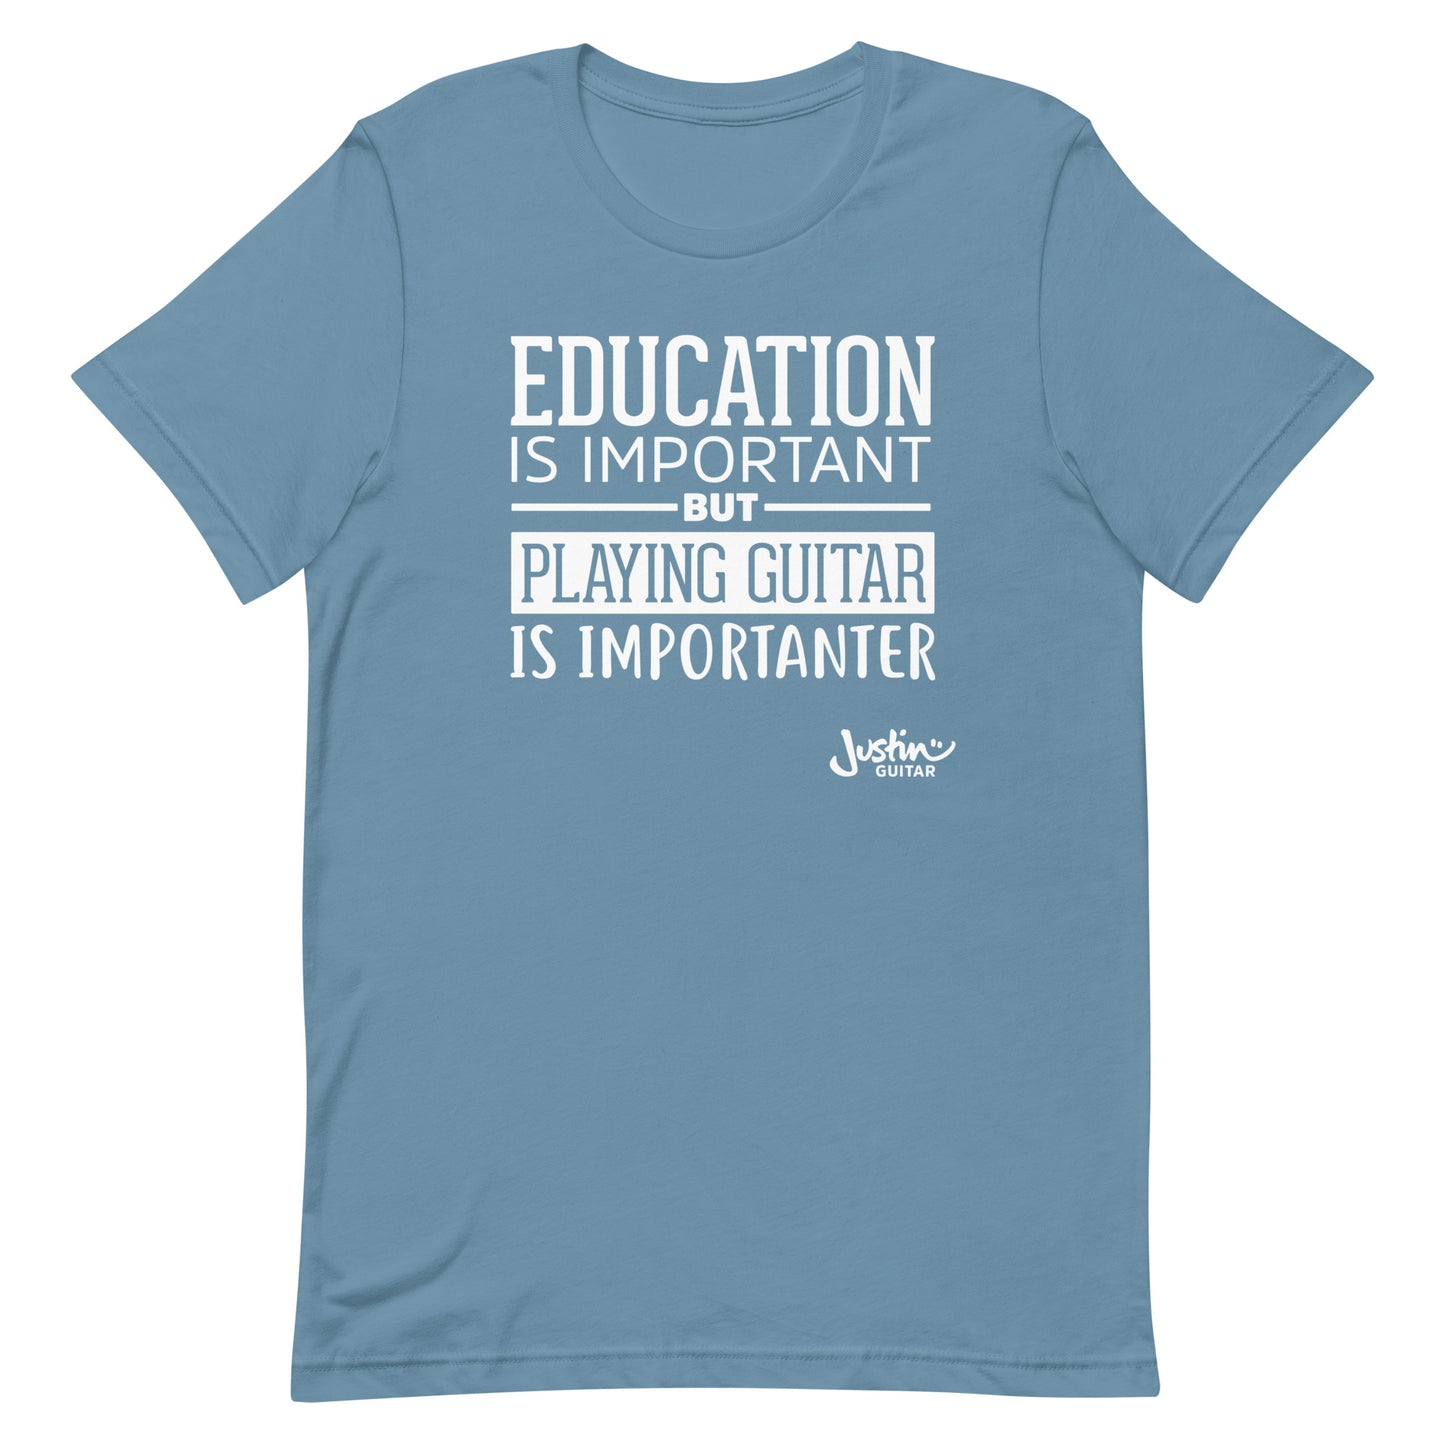 Blues steel tshirt that says 'Education is important, but playing guitar is importanter'